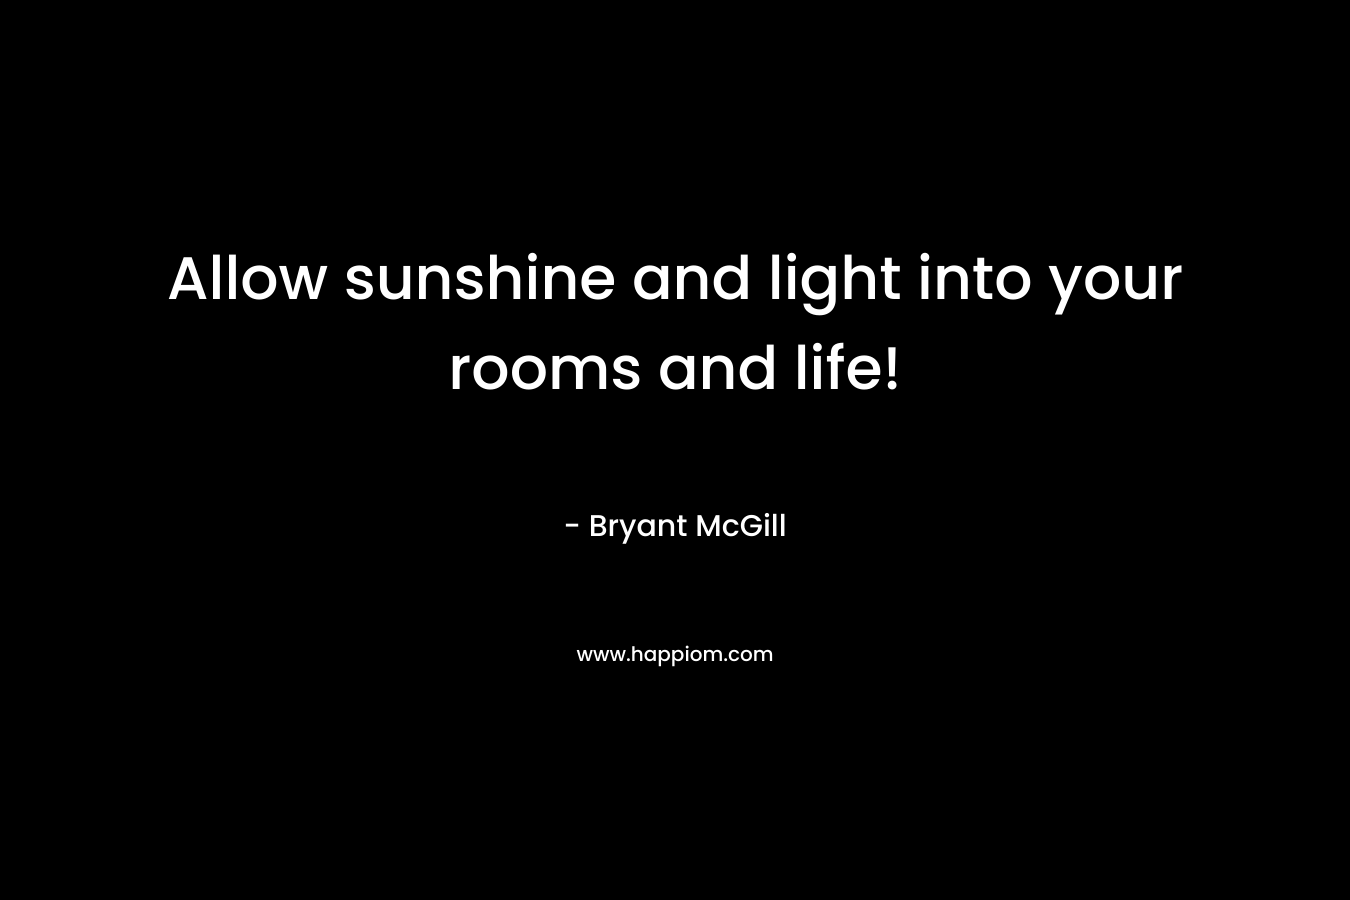 Allow sunshine and light into your rooms and life!